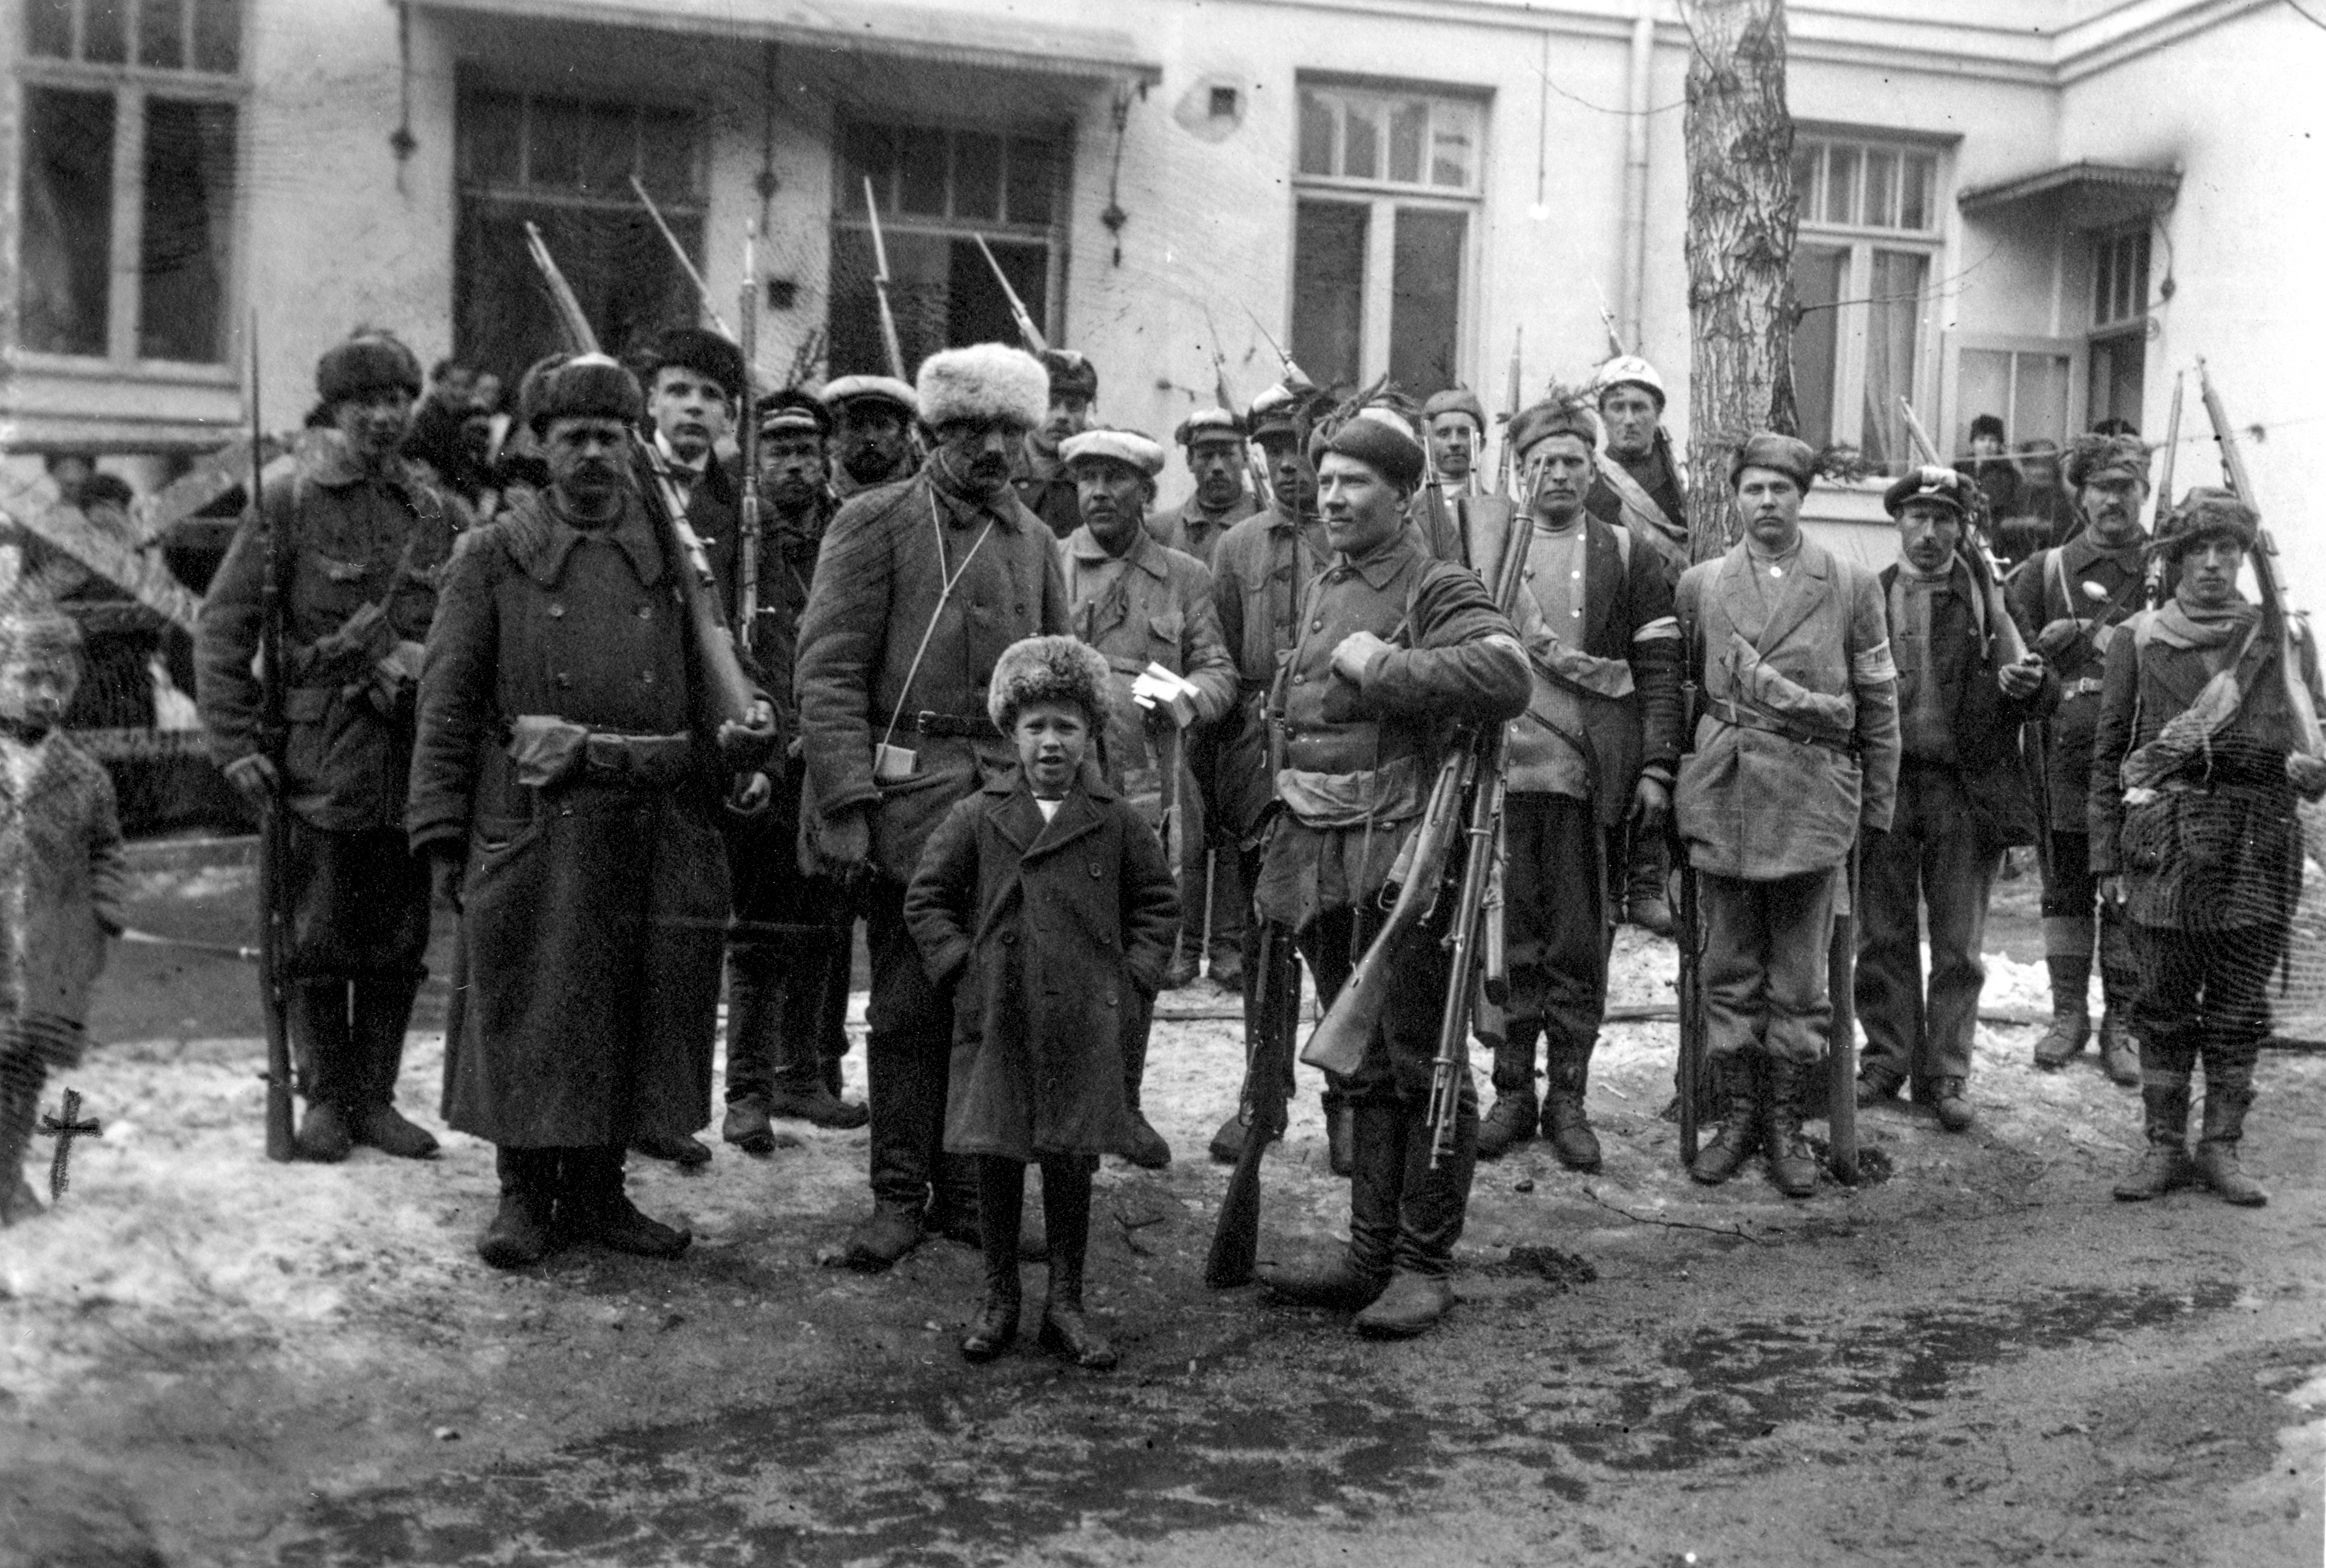 White troops in the centre of Tampere on 5 April 1918 (26970234105) - CC-BY Tampere 1918, photographer unknown, Vapriiki photo archive. Finnish Civil War 1918, Photographer unknown, Vapriikki Photo Archives.